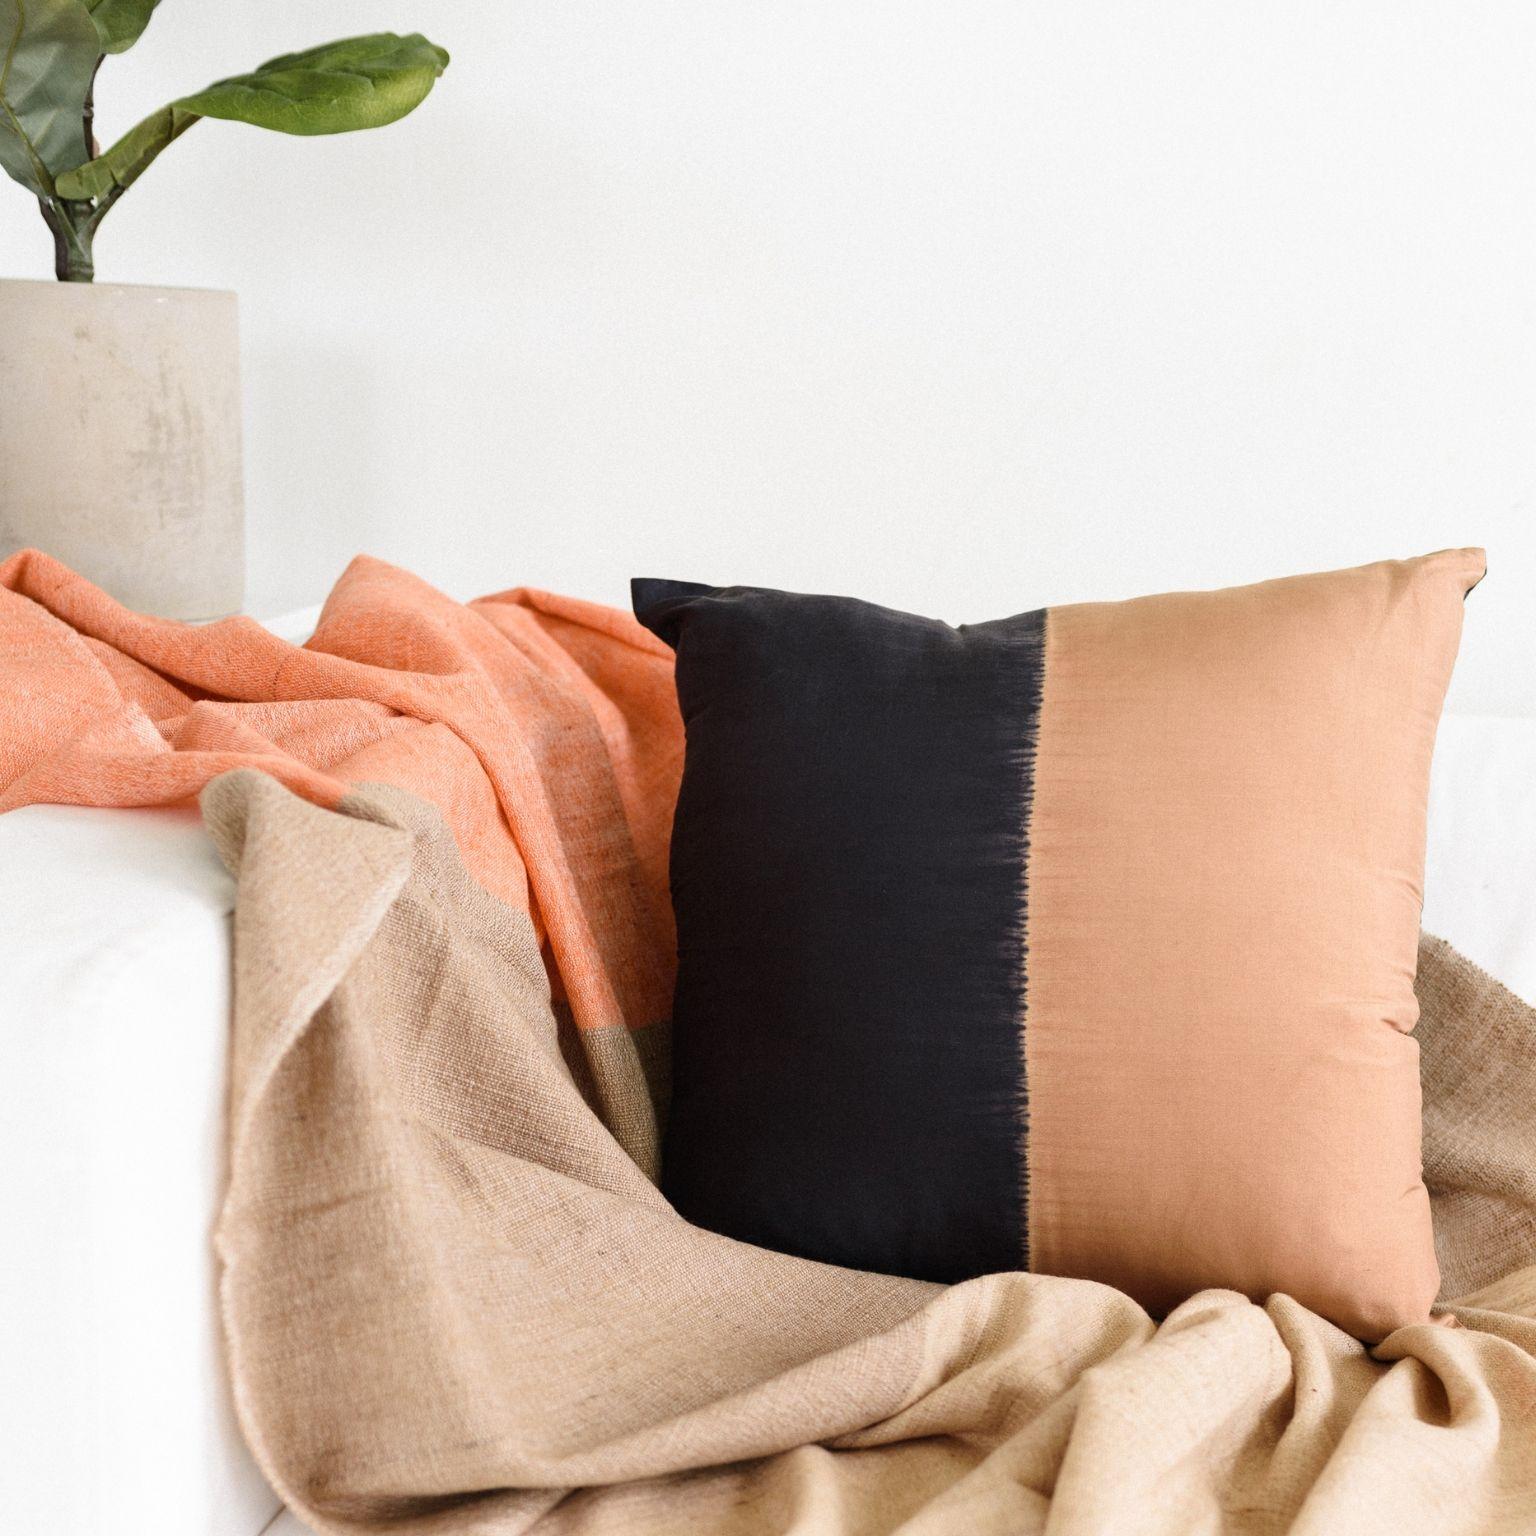 Custom design by Studio Variously, Kala pillow , our bestseller , is handmade by master artisans in India. A sustainable design brand based out of Michigan, Studio Variously exclusively collaborates with artisan communities to restore and revive